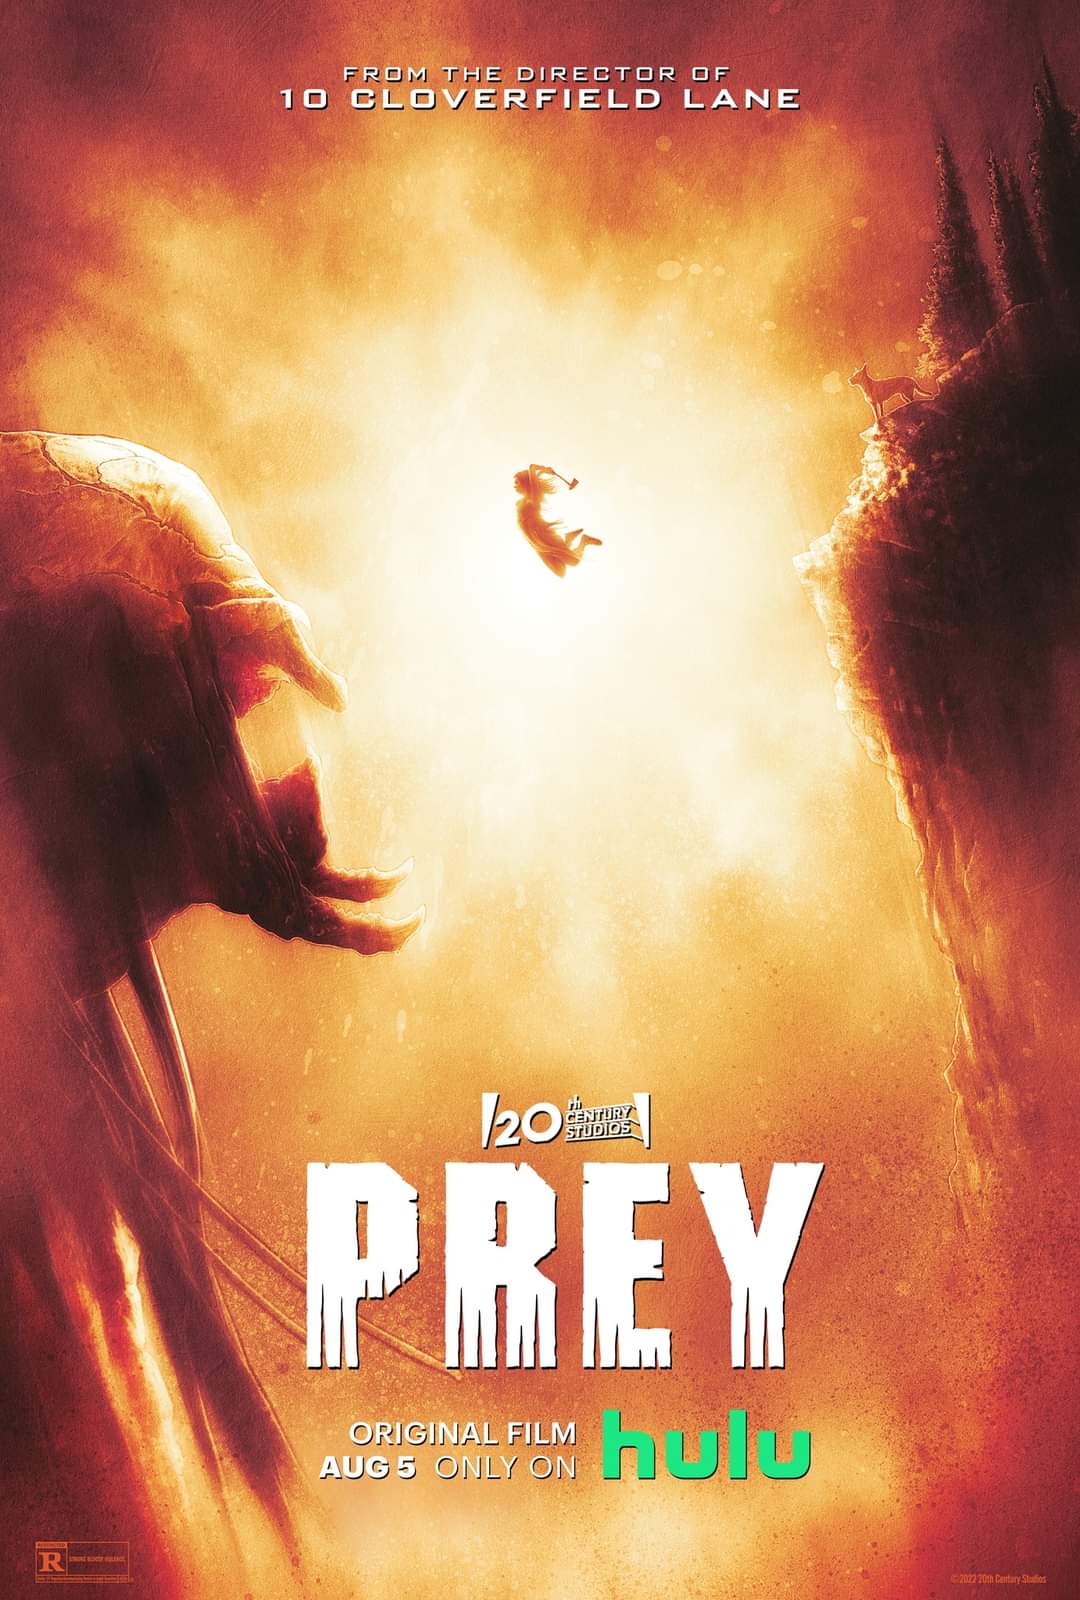 Yet another Prey (2022) movie poster unveiled ahead of Hulu release date!